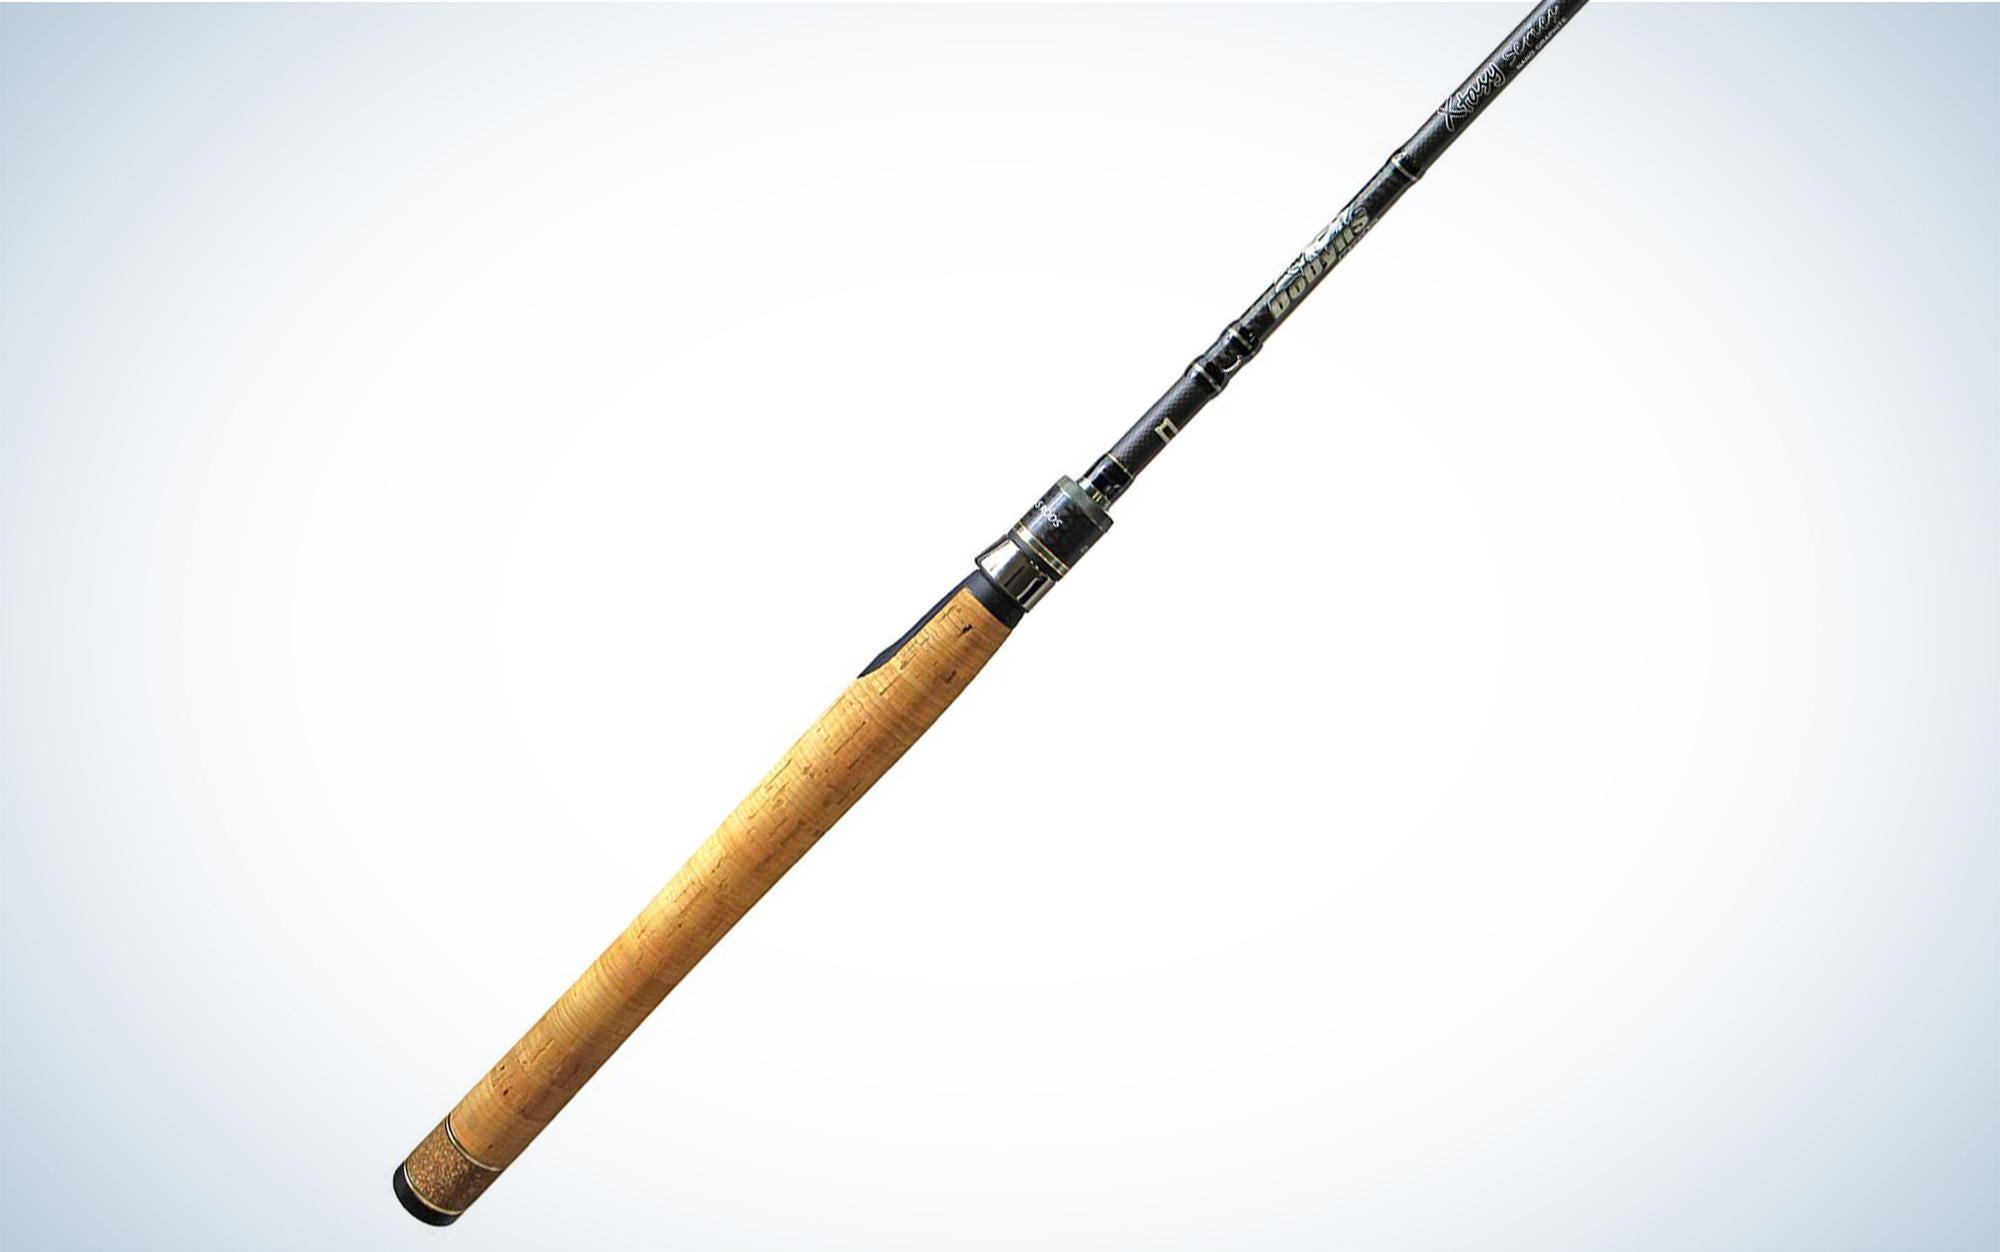 What is a good Lew's spinning rod to pair this up with? : r/bassfishing